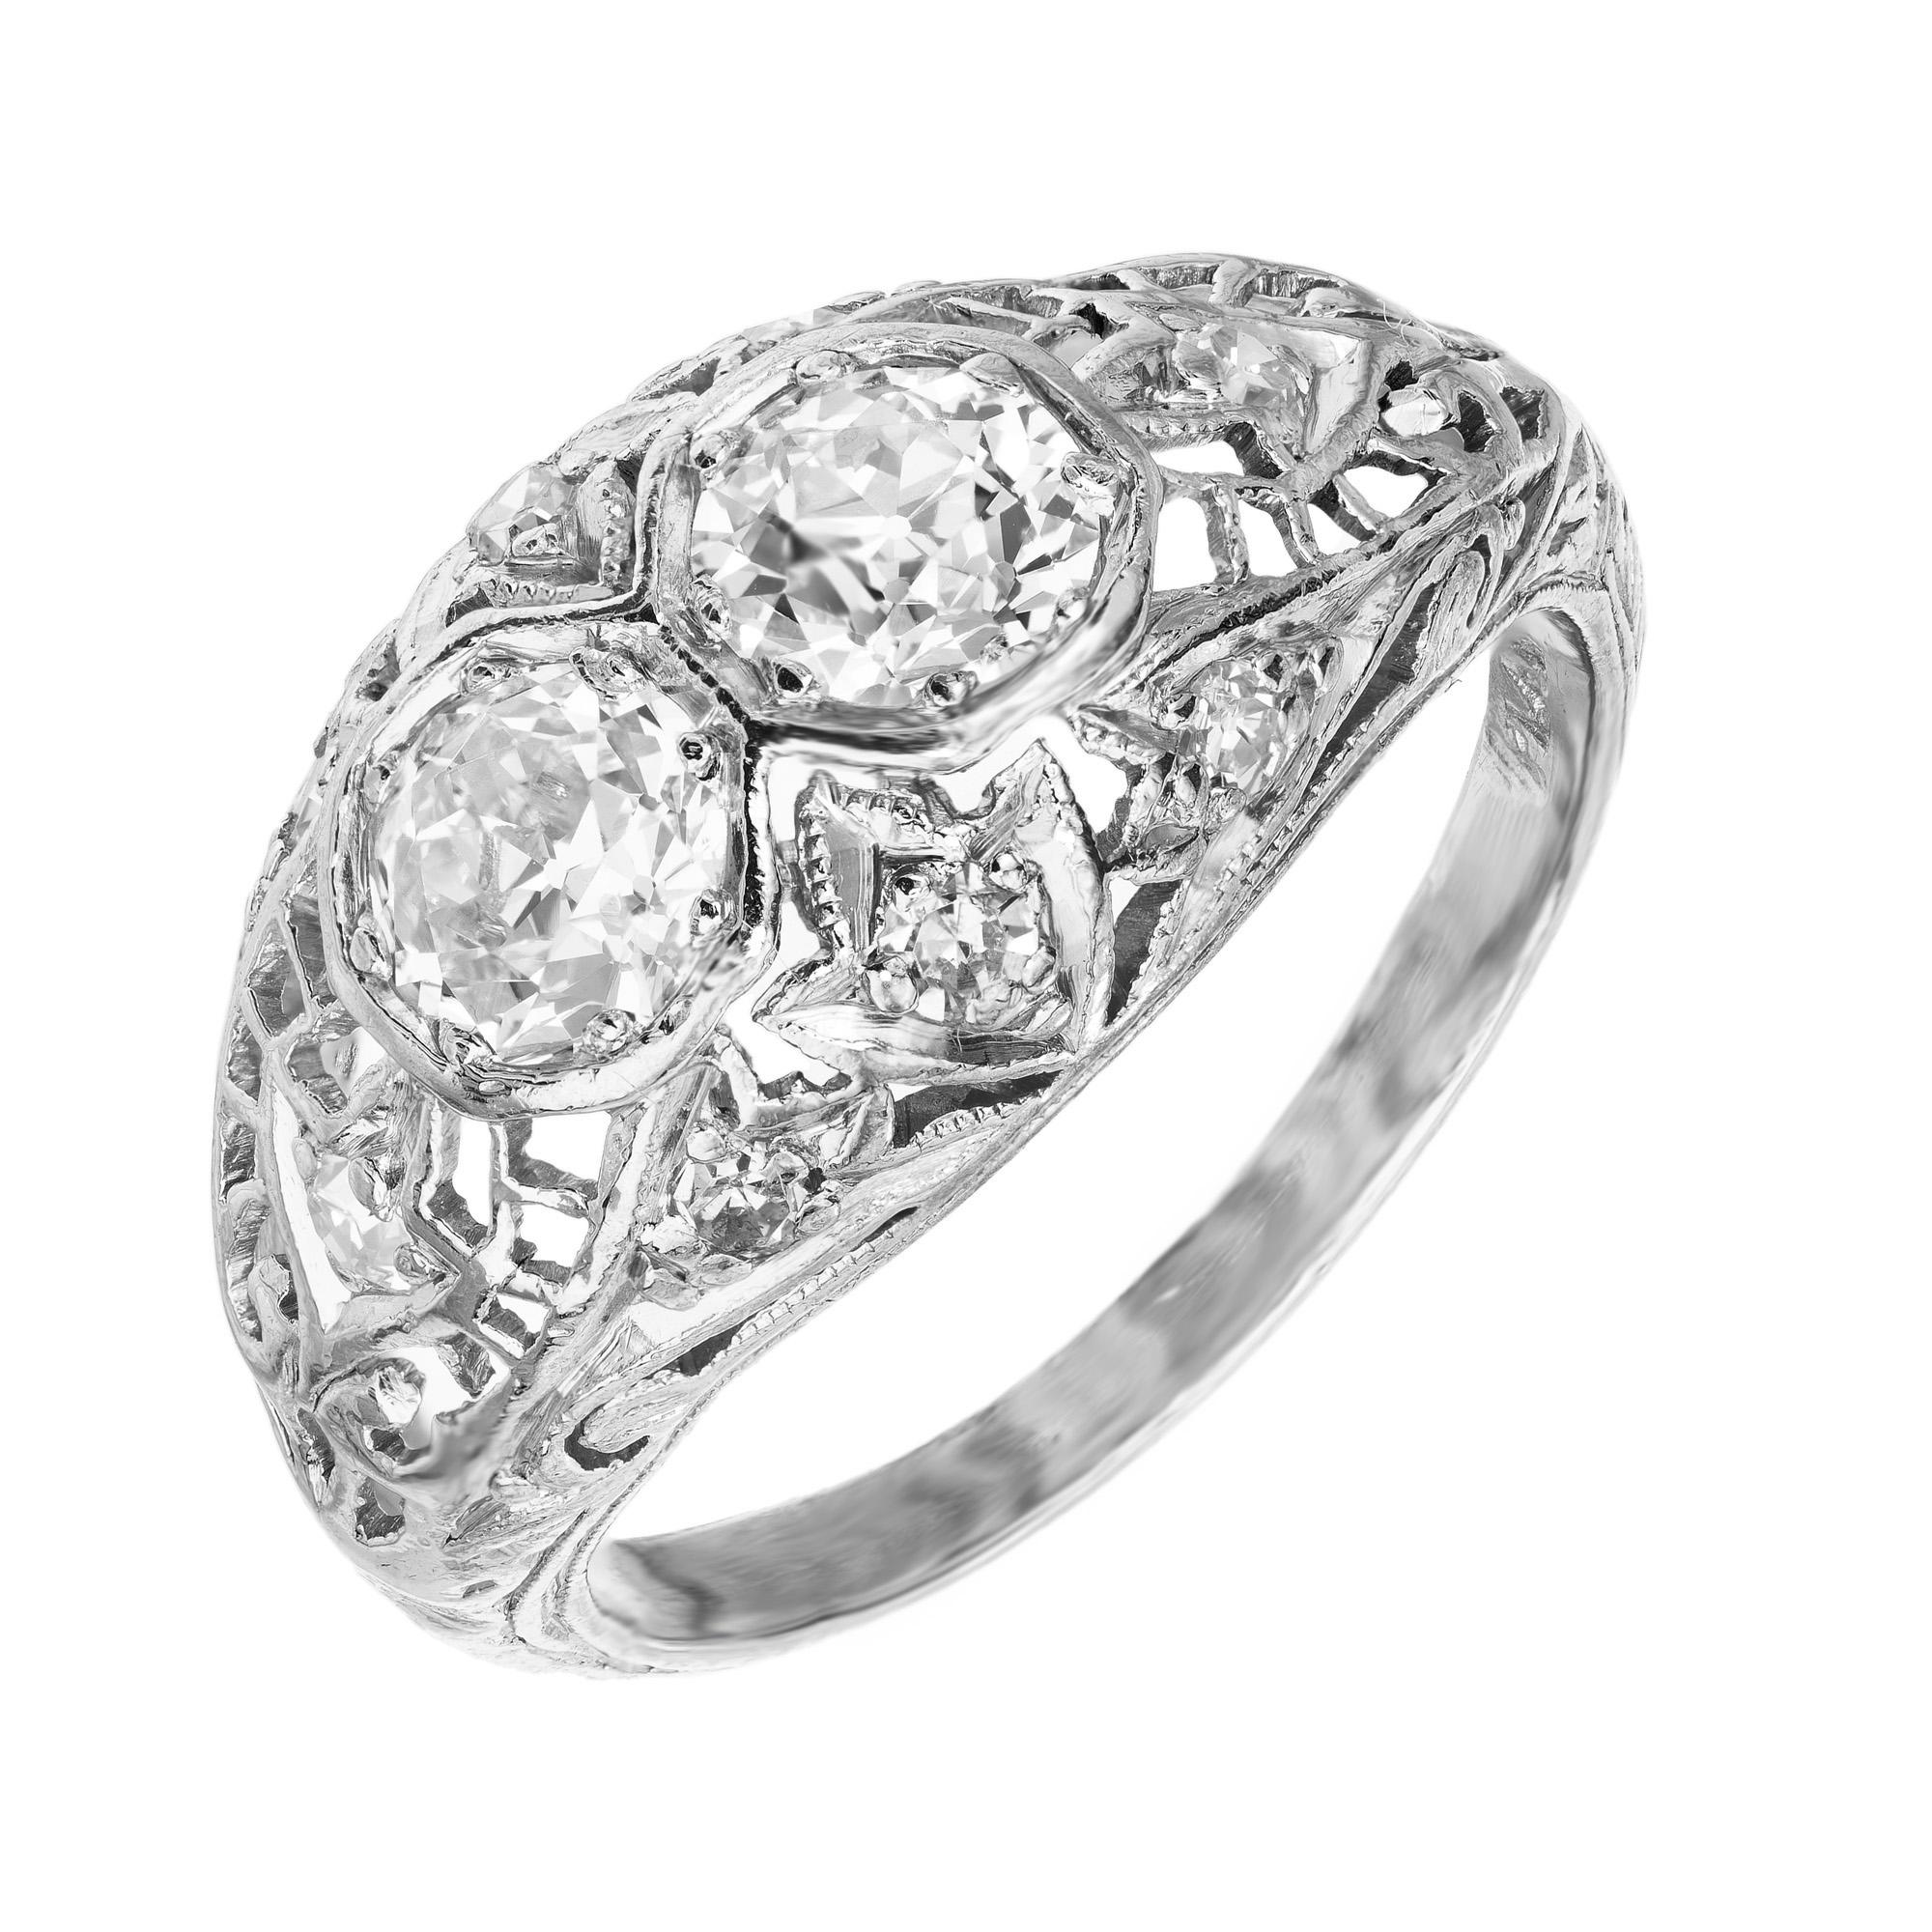 Two stone diamond dome engagement ring. Set with 2 Old European shape diamonds with a total weight of .50cts. This Platinum filigree setting is also enriched with 8 single cut diamonds set throughout the ring. The mounting is hand pierced with